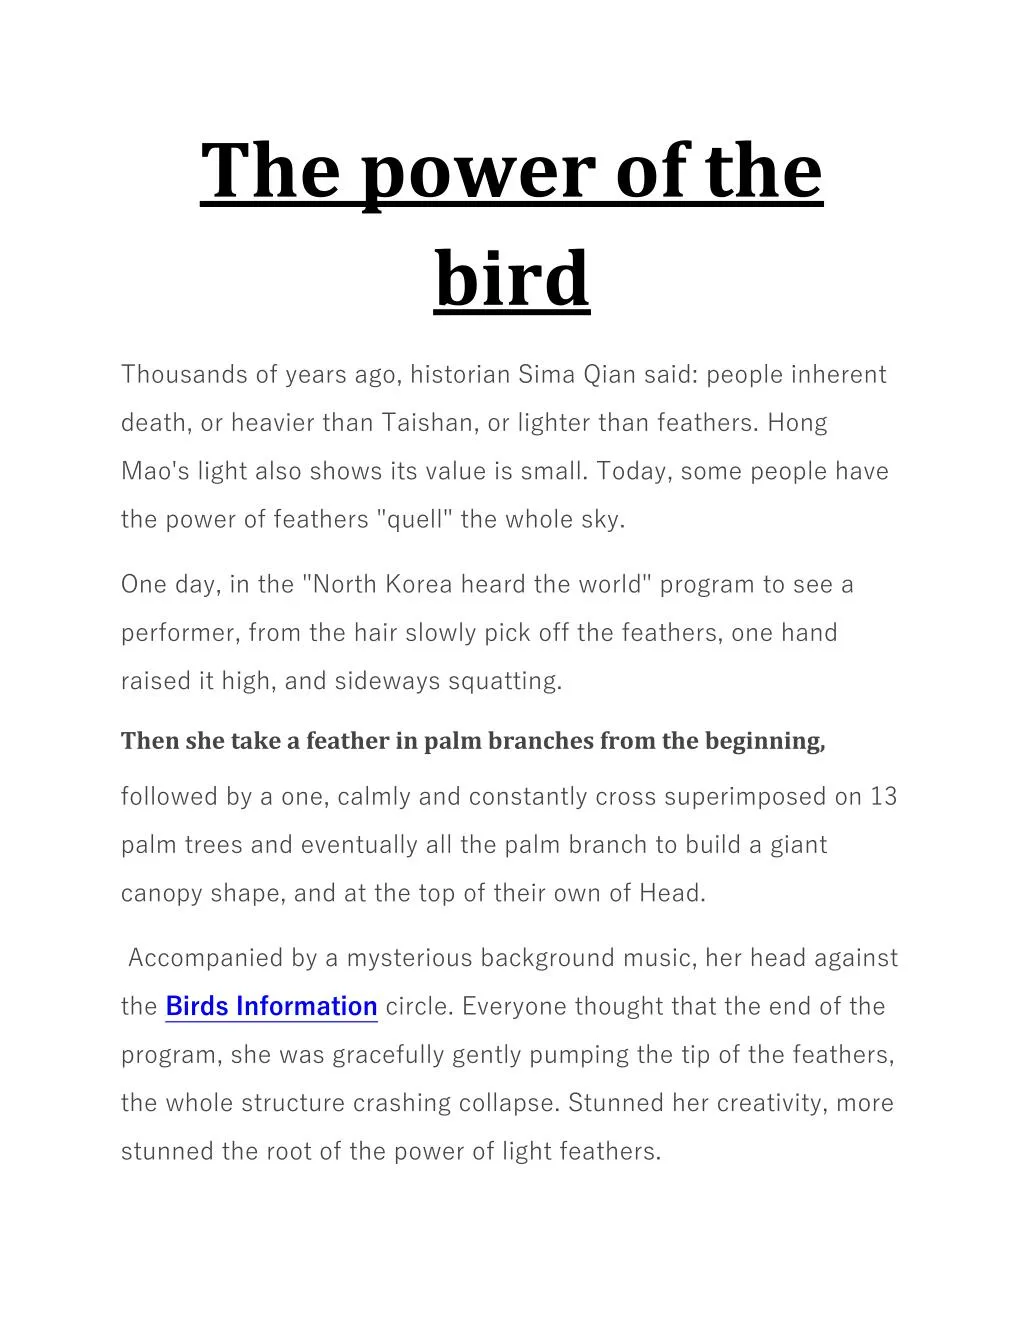 the power of the bird